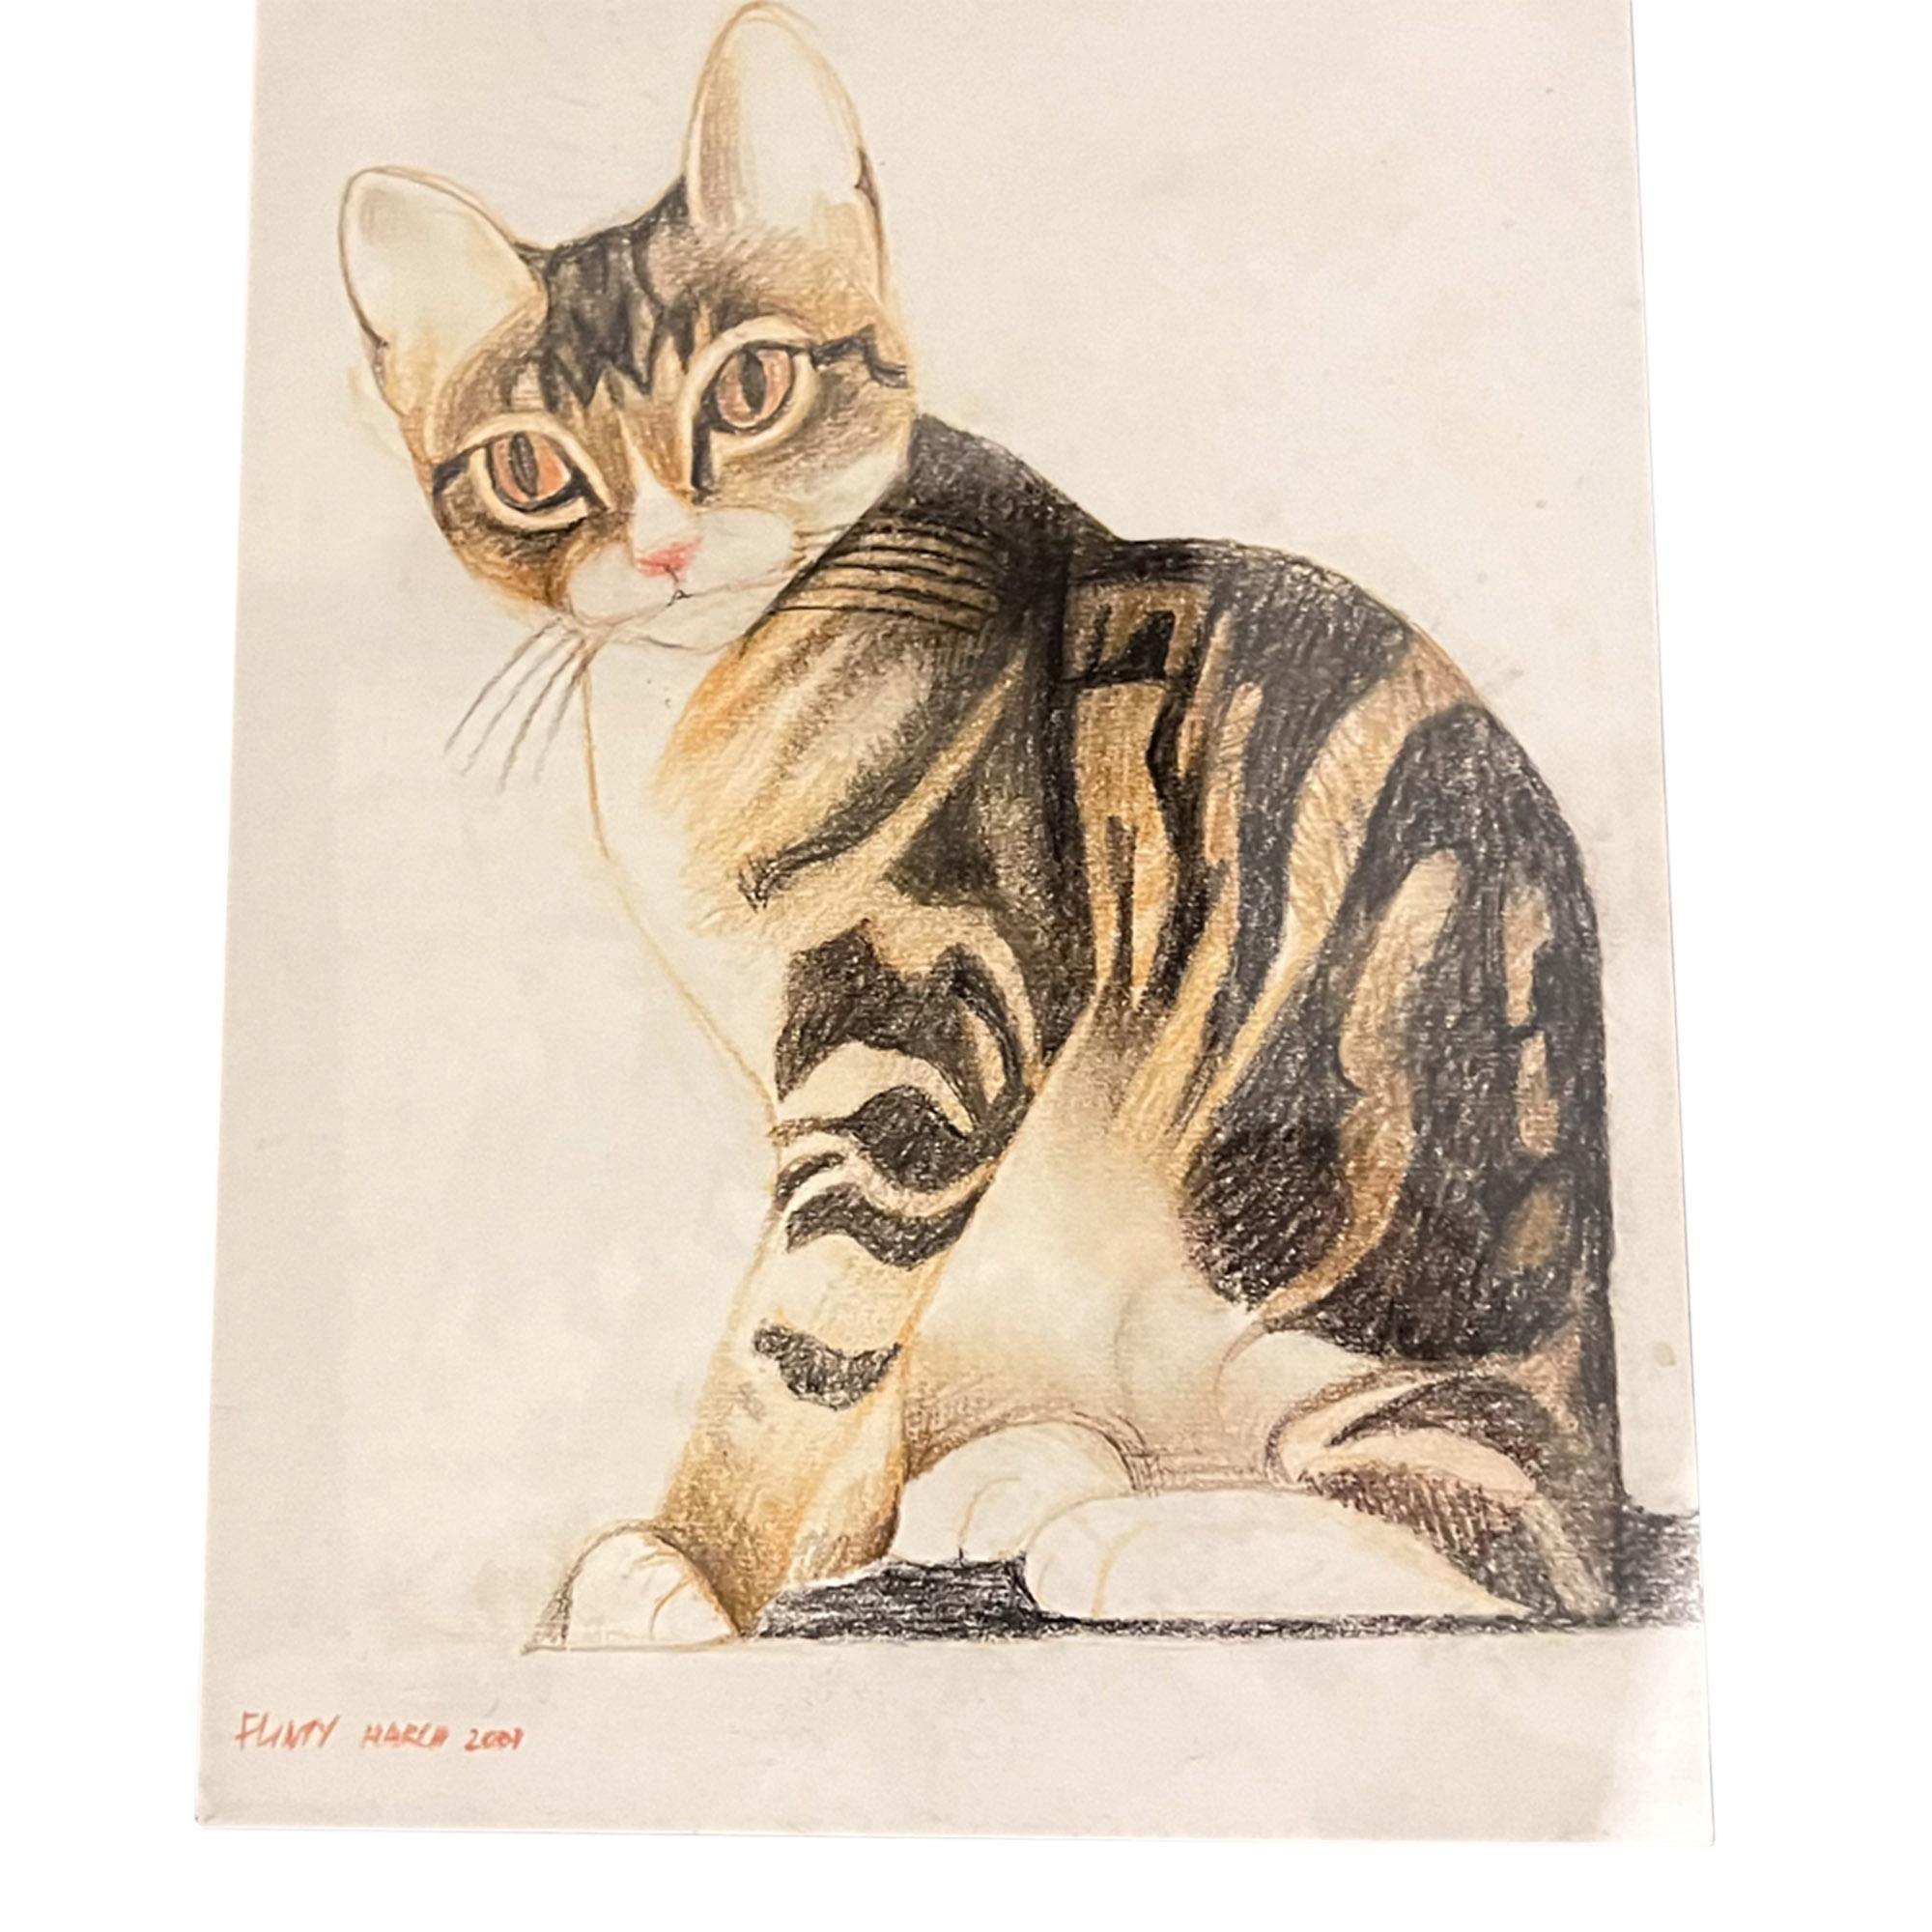 This beautiful little portrait of Flinty the cat was drawn with pastel and signed by Alfred Daniels in March 2007.

We have had this bespoke framed behind glass, with simple ebonised wood and black mount. The size of the picture itself is 28cm by